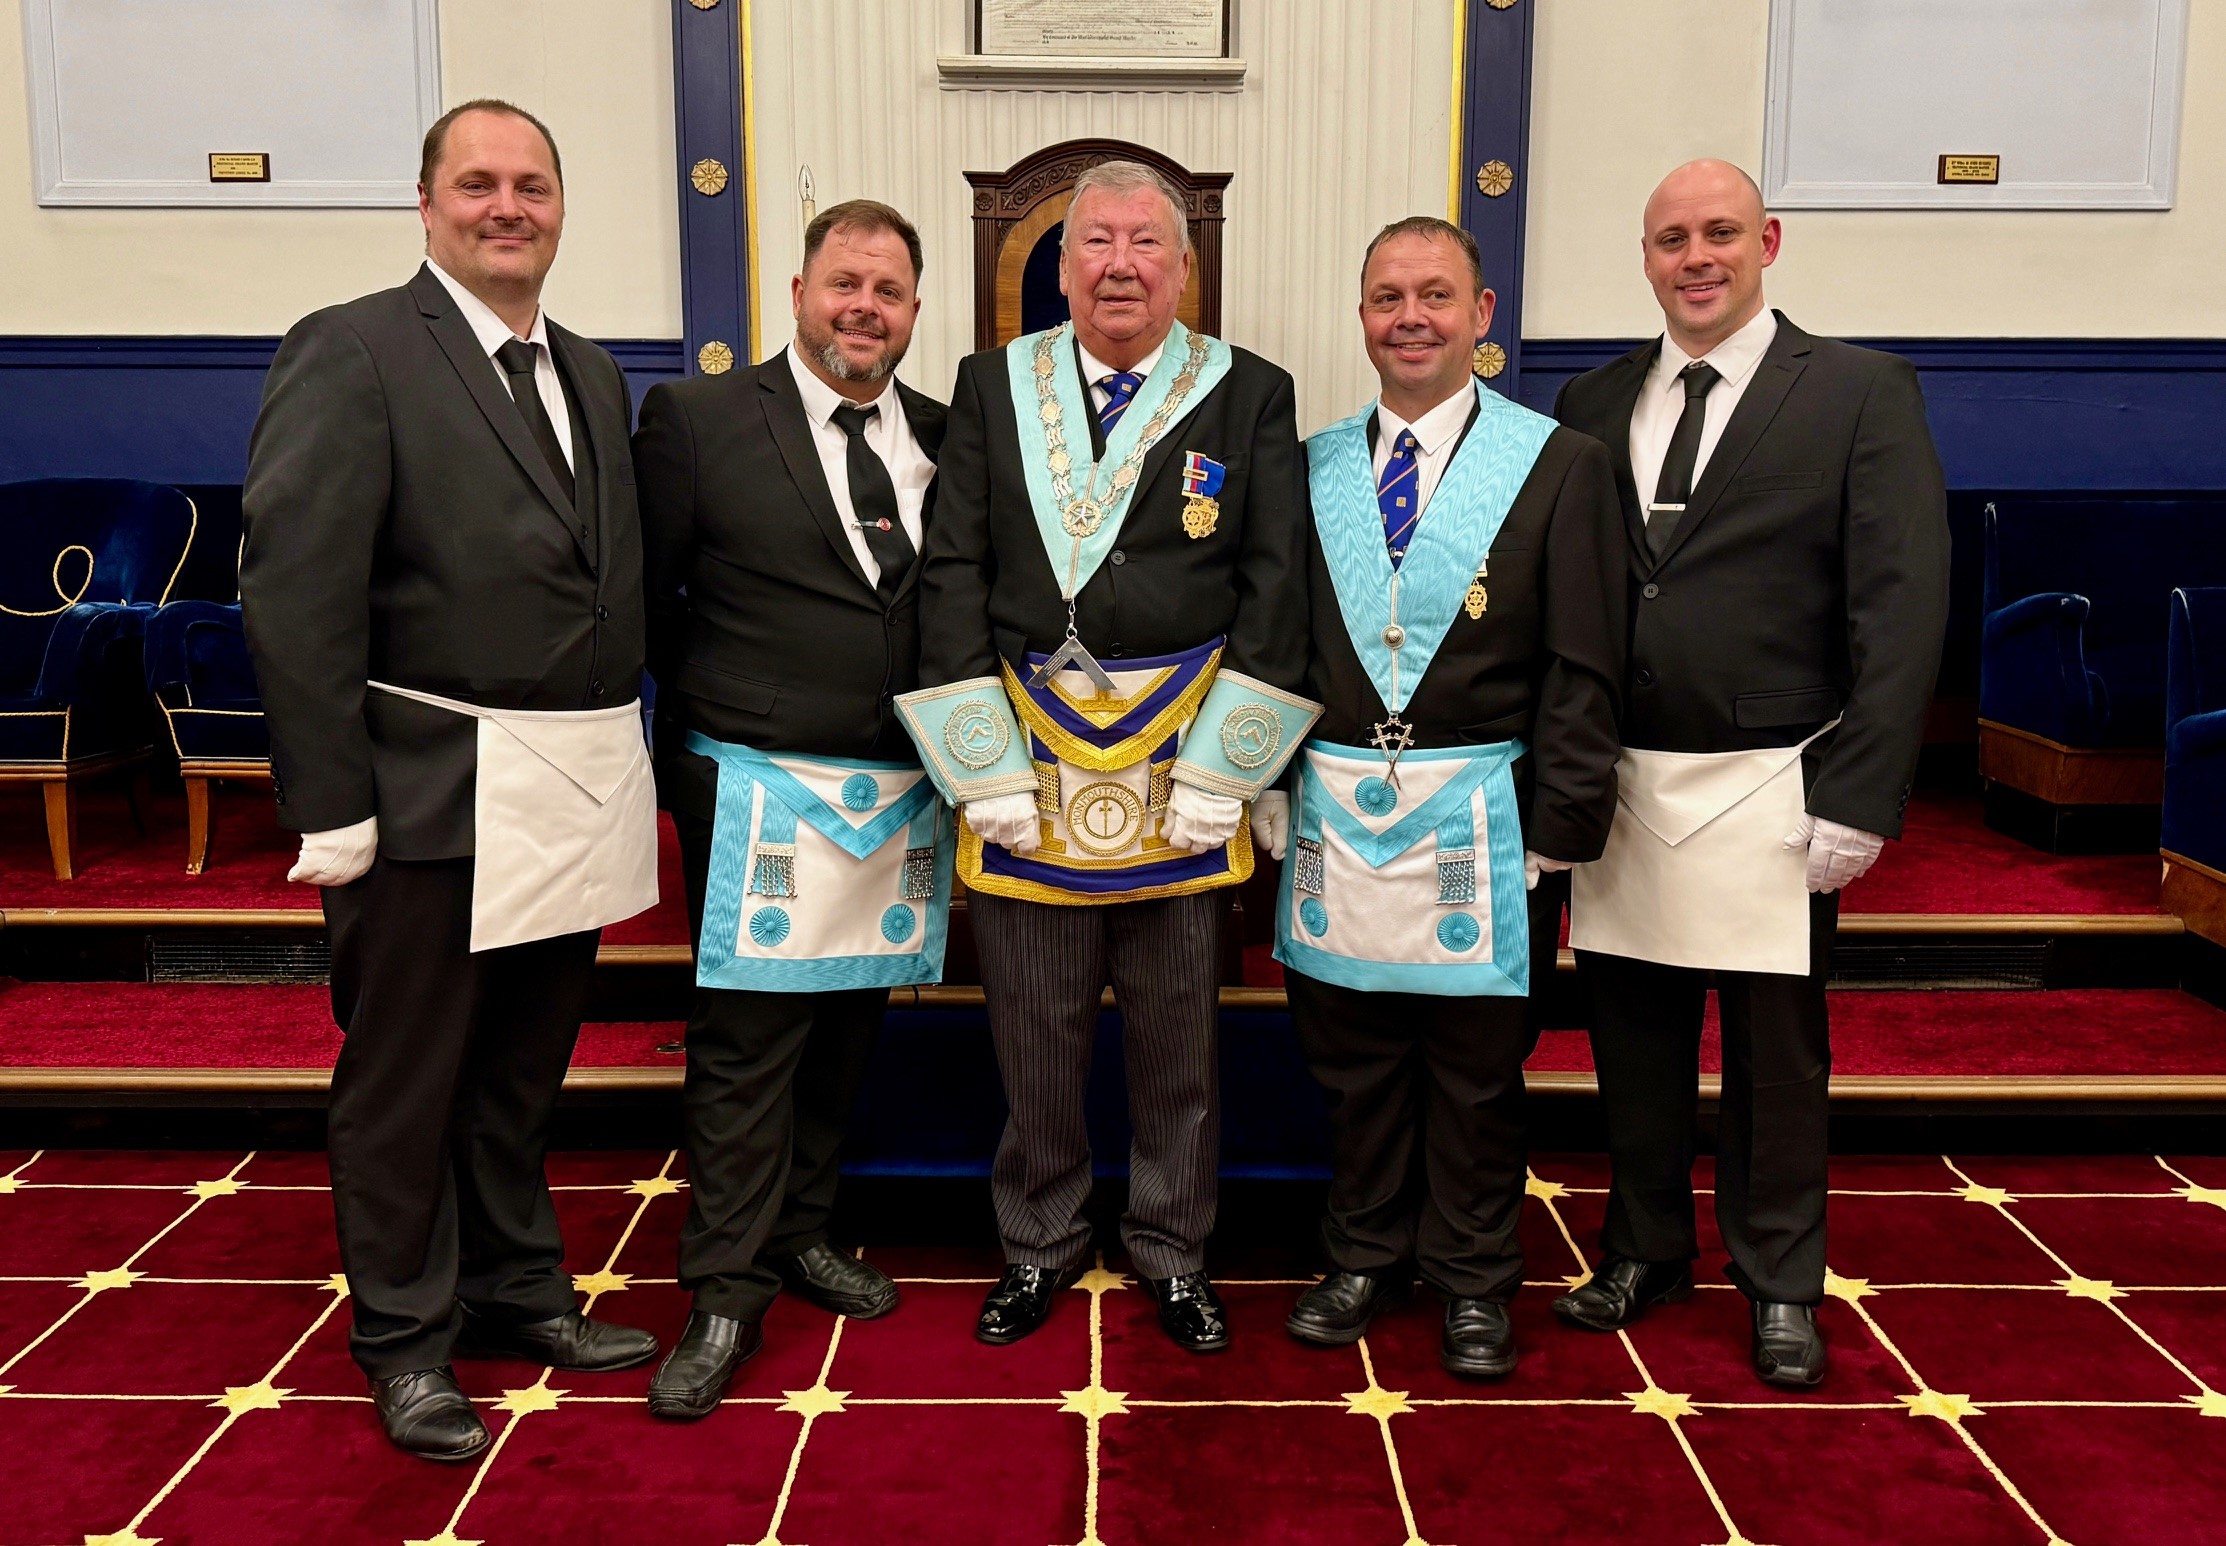 Four brothers in a masonic lodge wearing regalisa